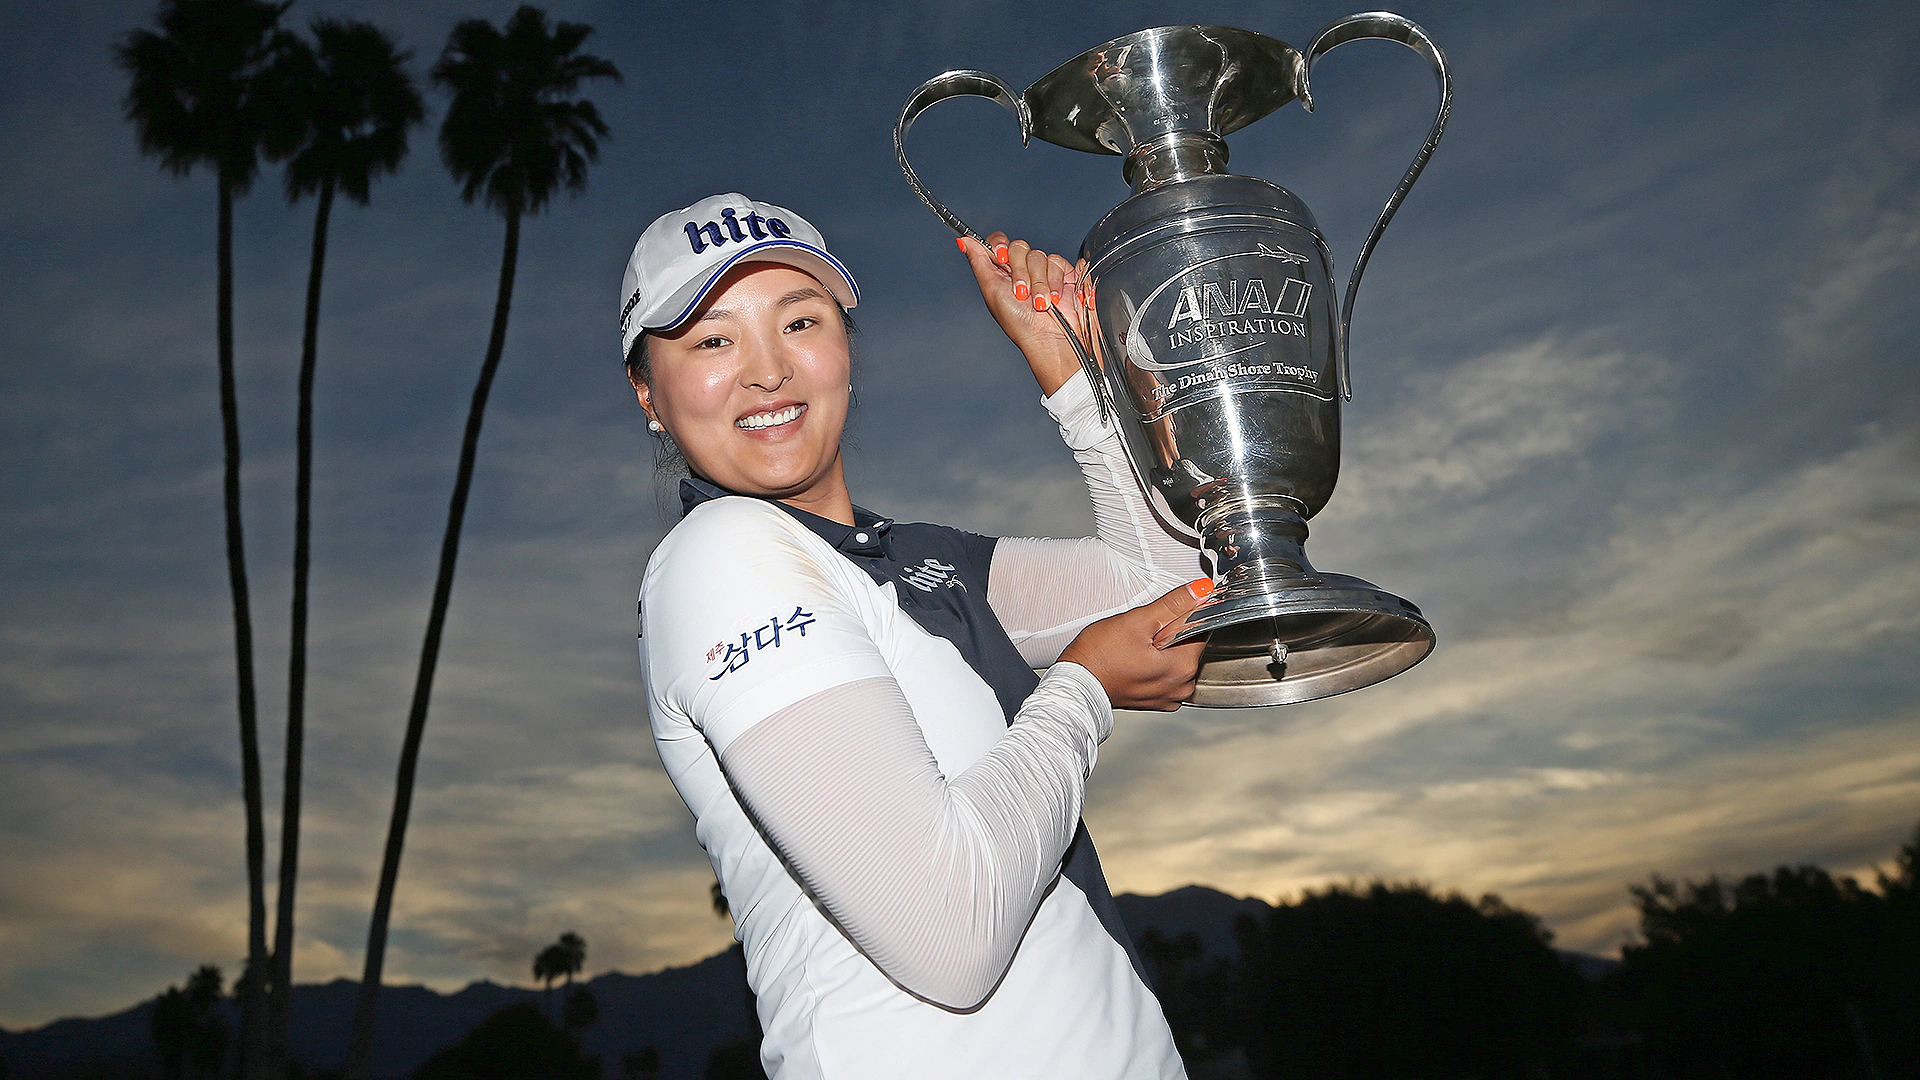 World No. 1 returns to ANA Inspiration for first time since winning in 2019